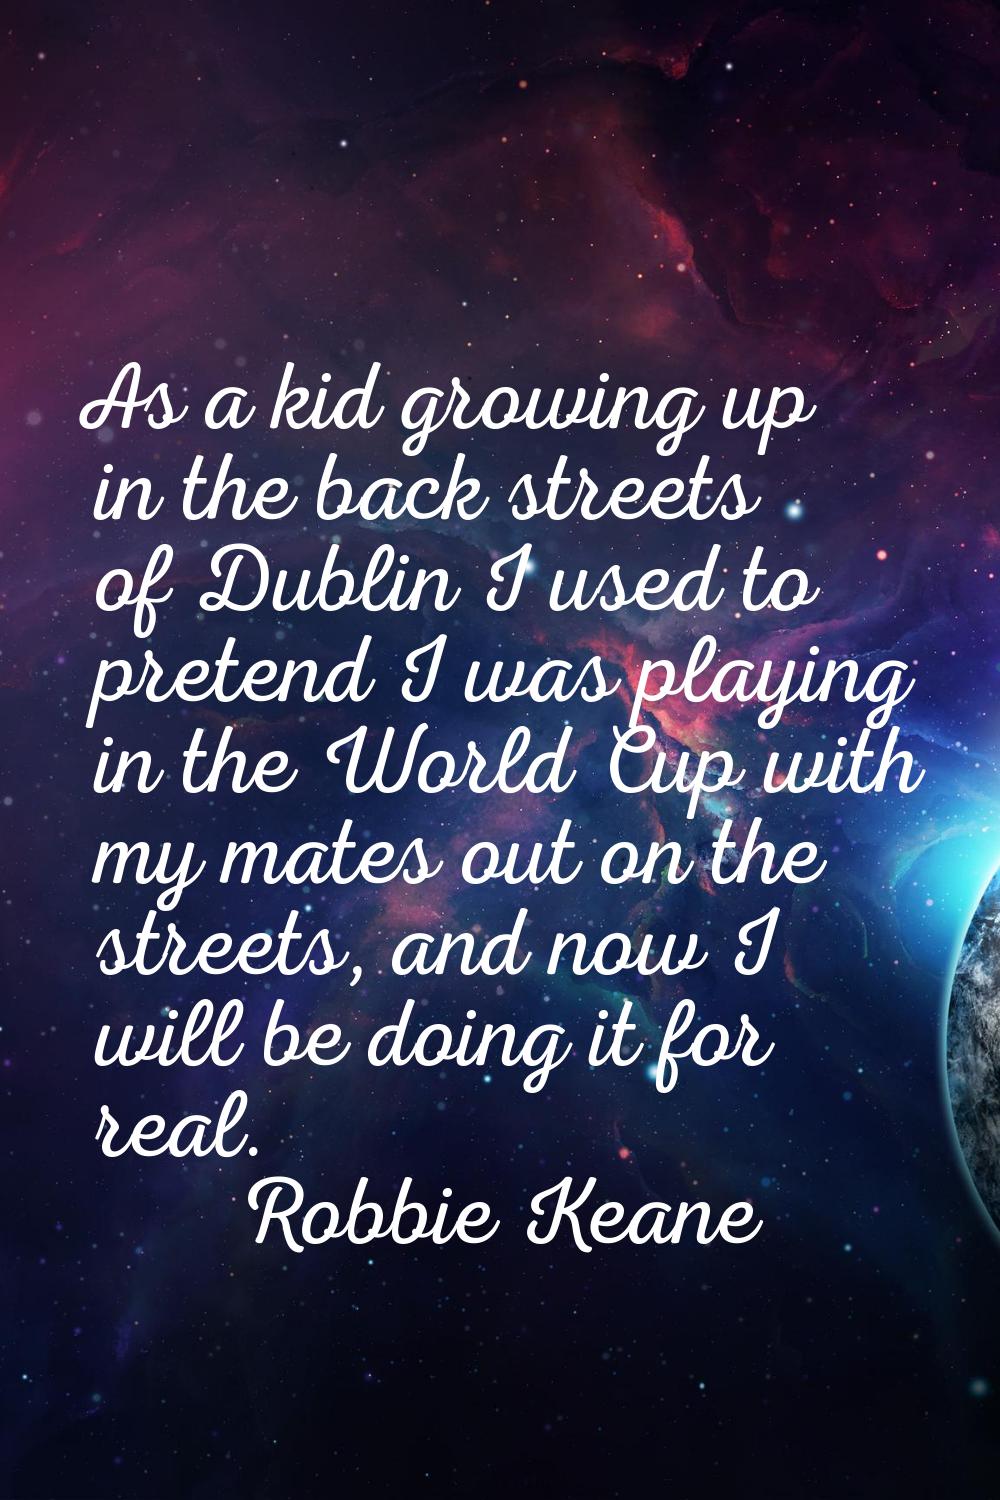 As a kid growing up in the back streets of Dublin I used to pretend I was playing in the World Cup 